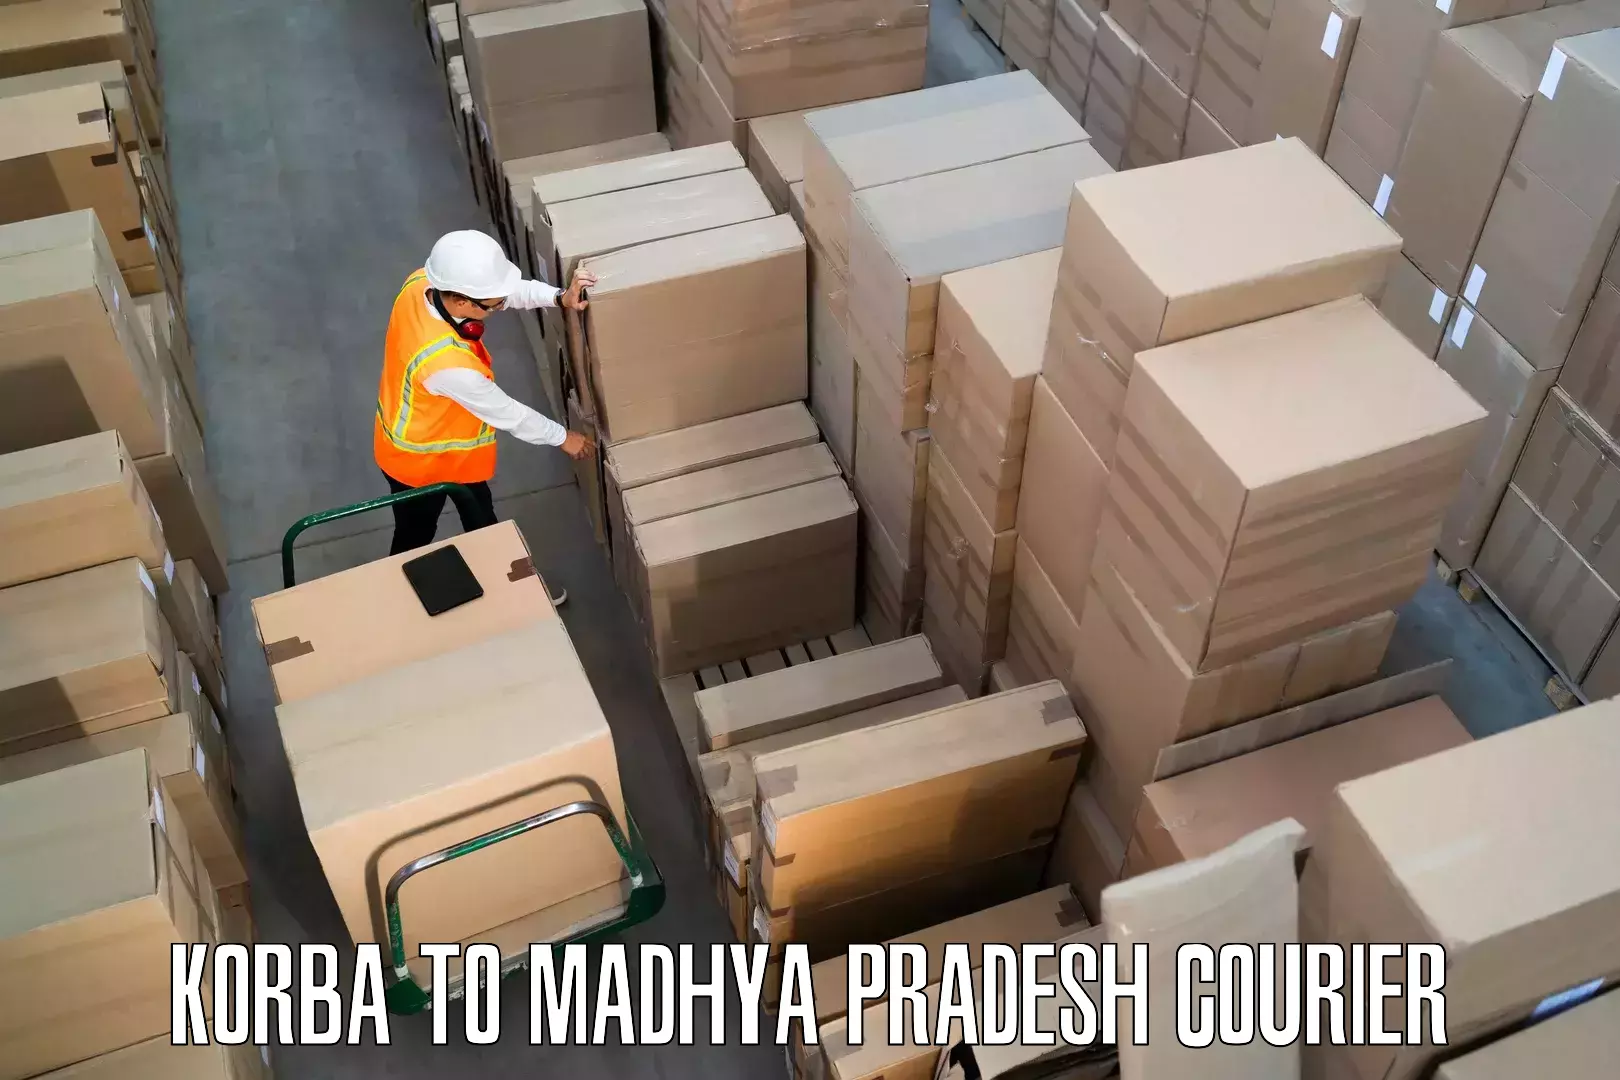 Quality relocation assistance Korba to BHEL Bhopal